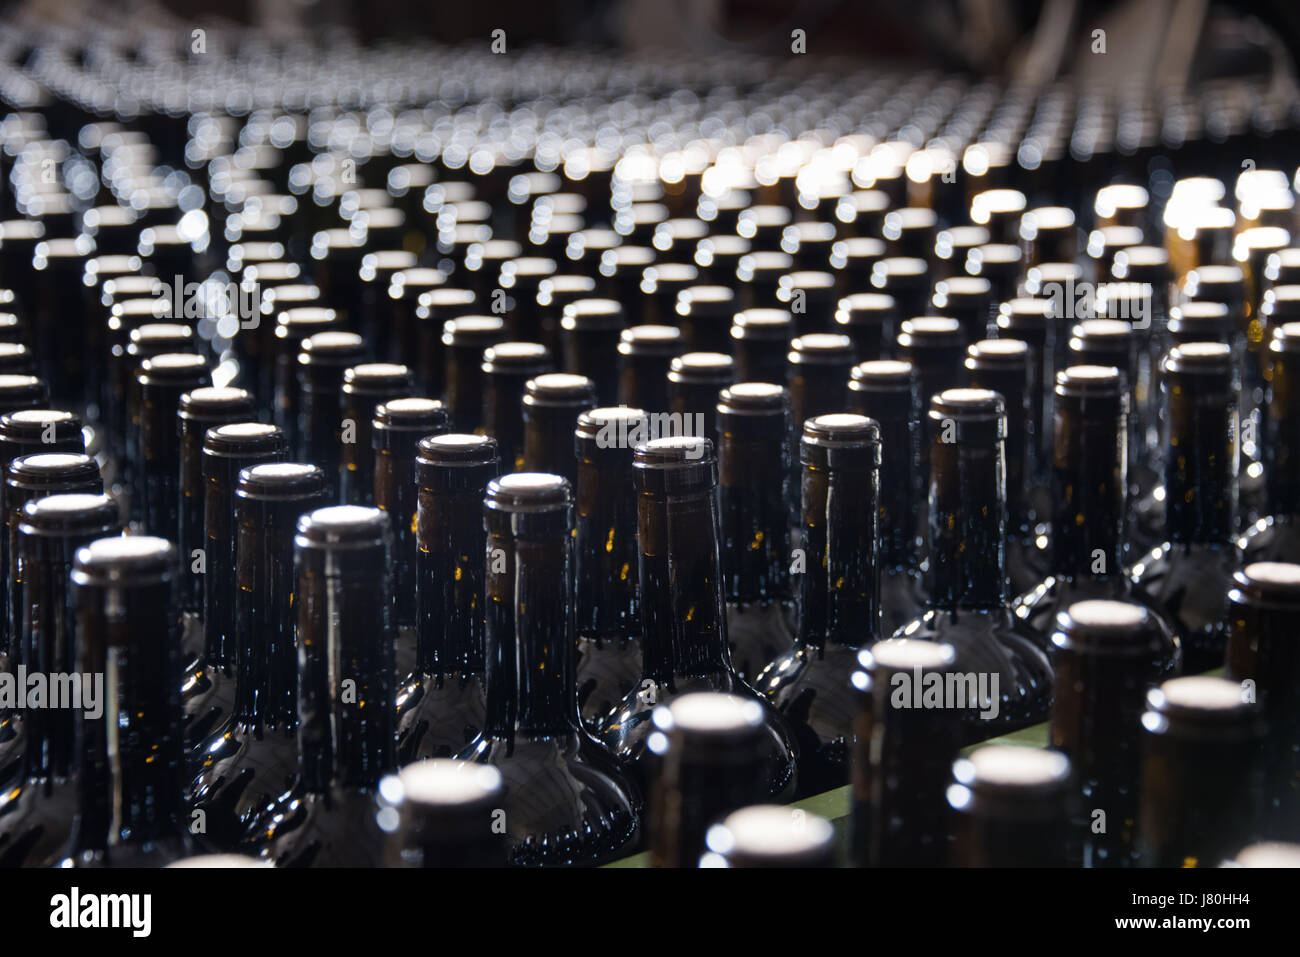 Bottles of unlabeled red wine stand in rows inside a winery. Stock Photo